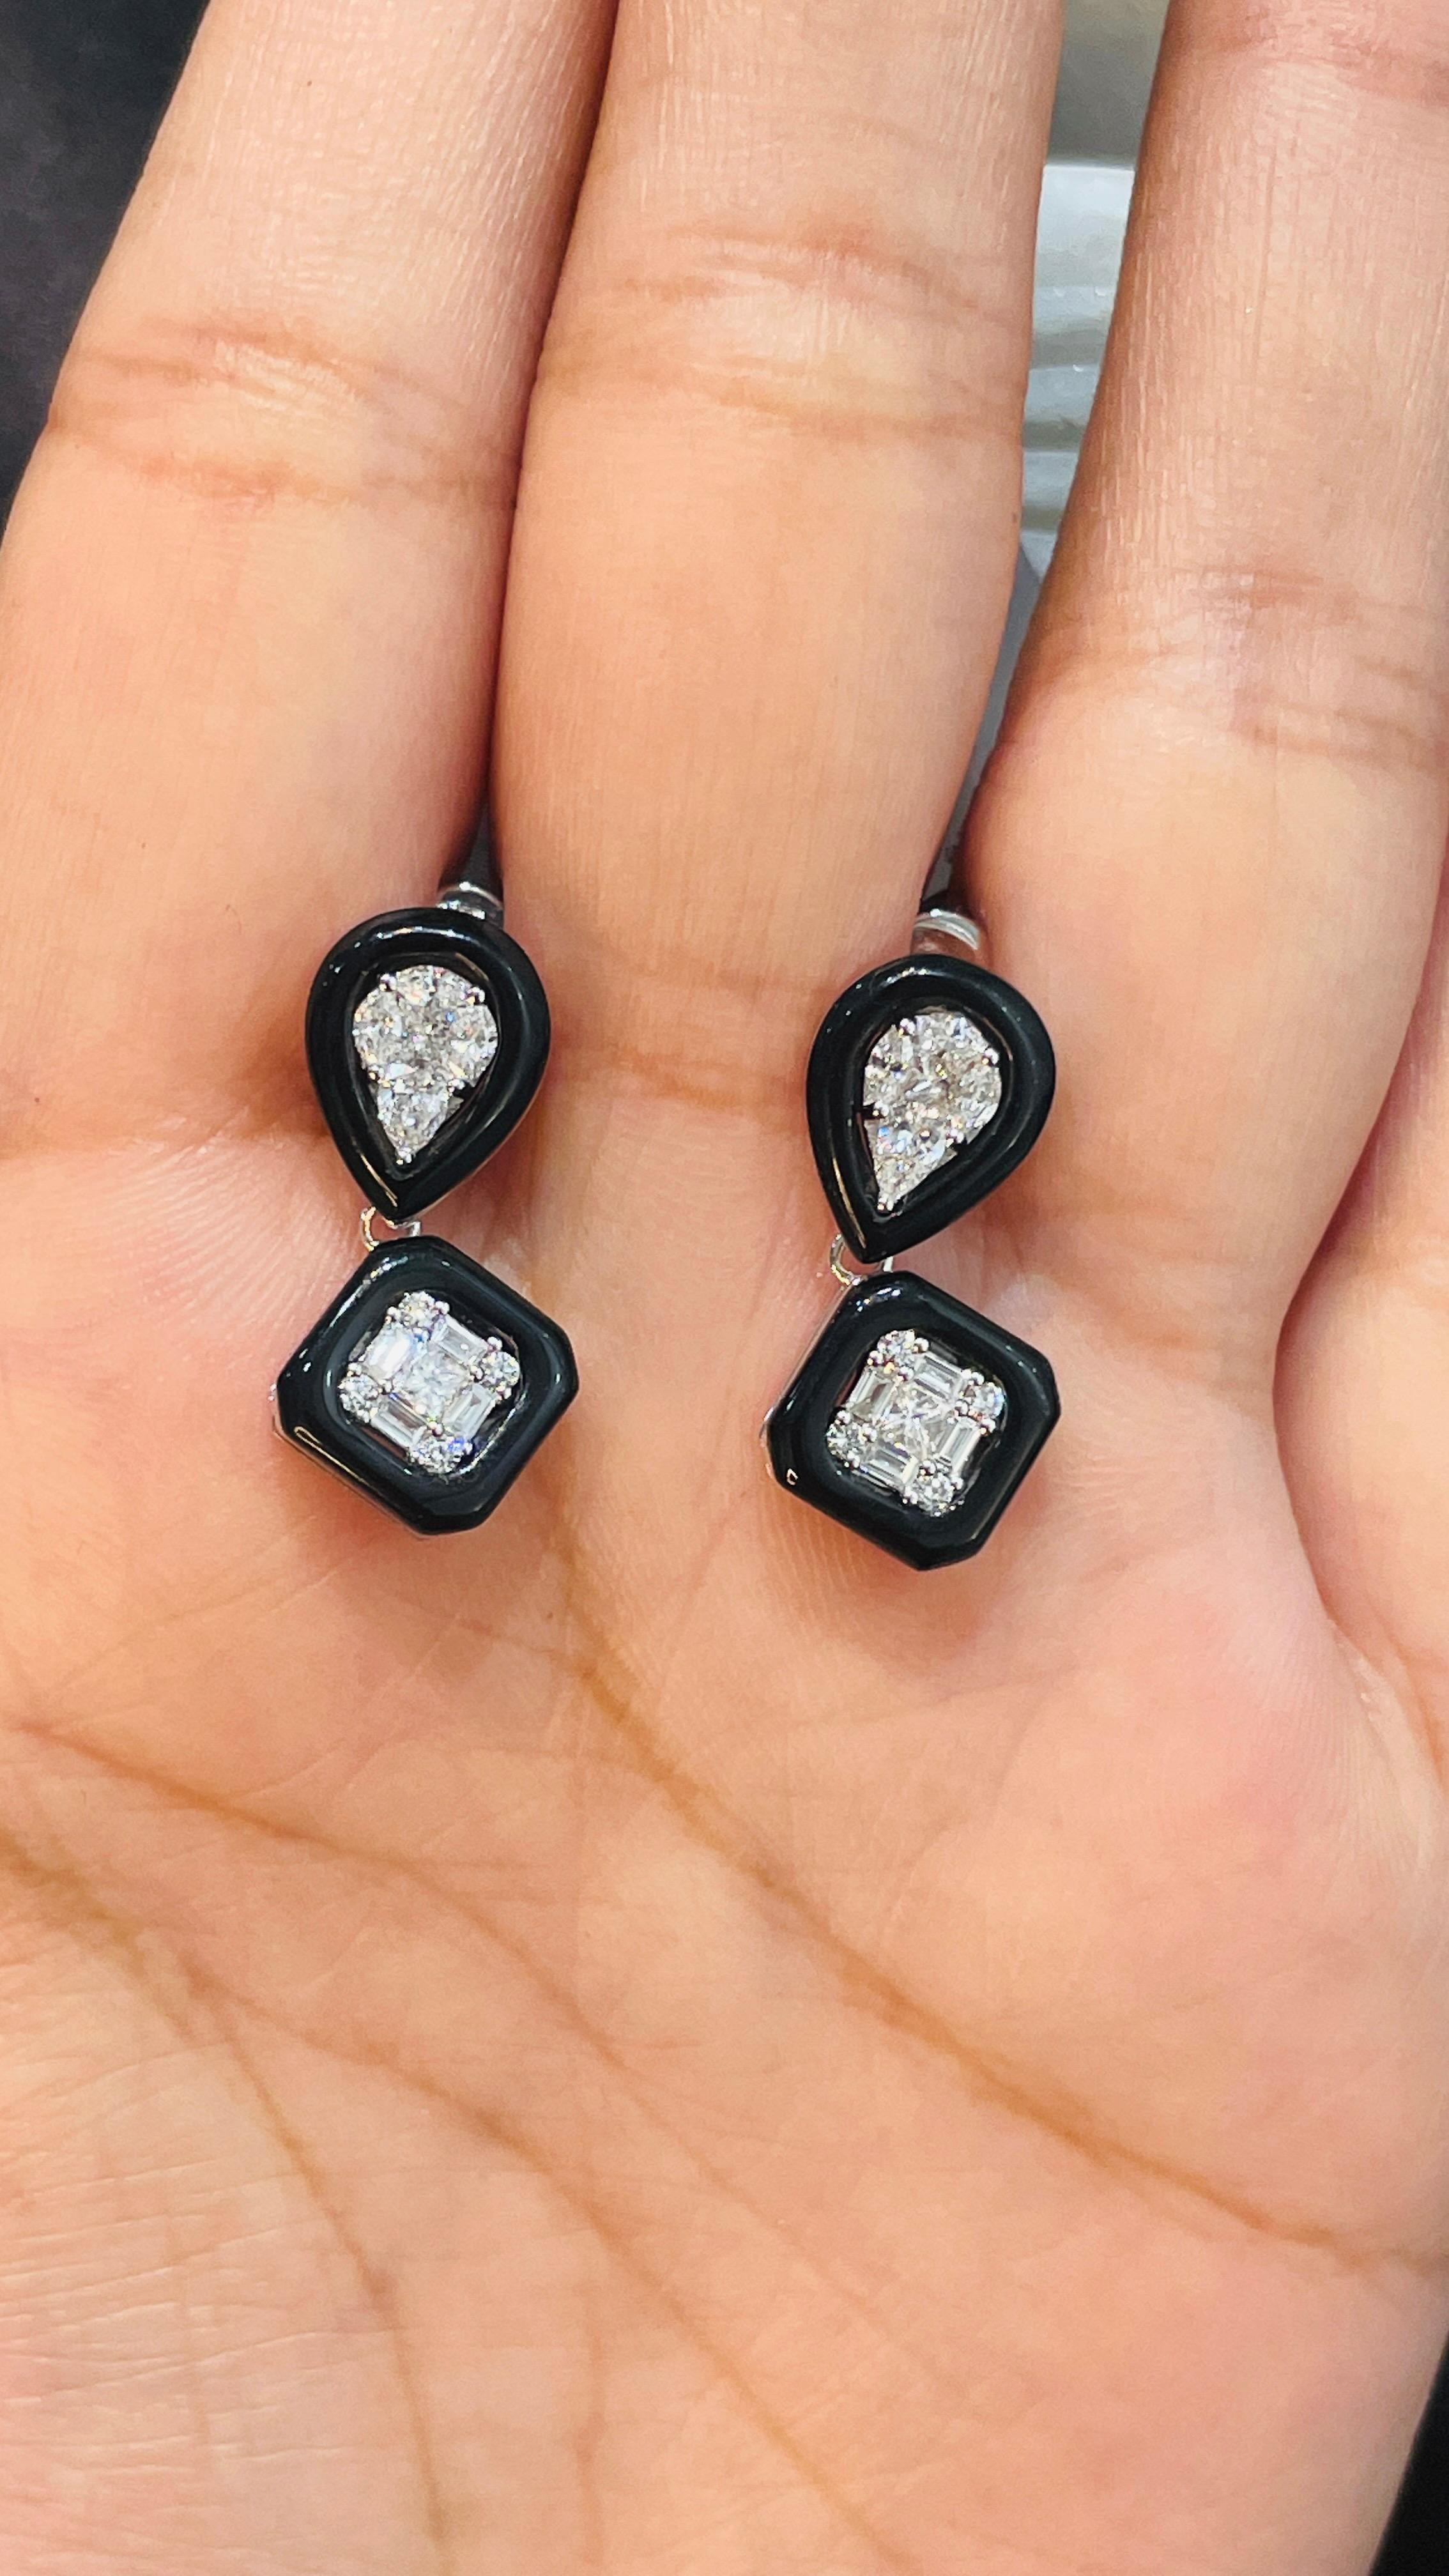 Diamond and Black Enamel Dangle earrings to make a statement with your look. These earrings create a sparkling, luxurious look featuring mix cut diamonds.
If you love to gravitate towards unique styles, this piece of jewelry is perfect for you.
For